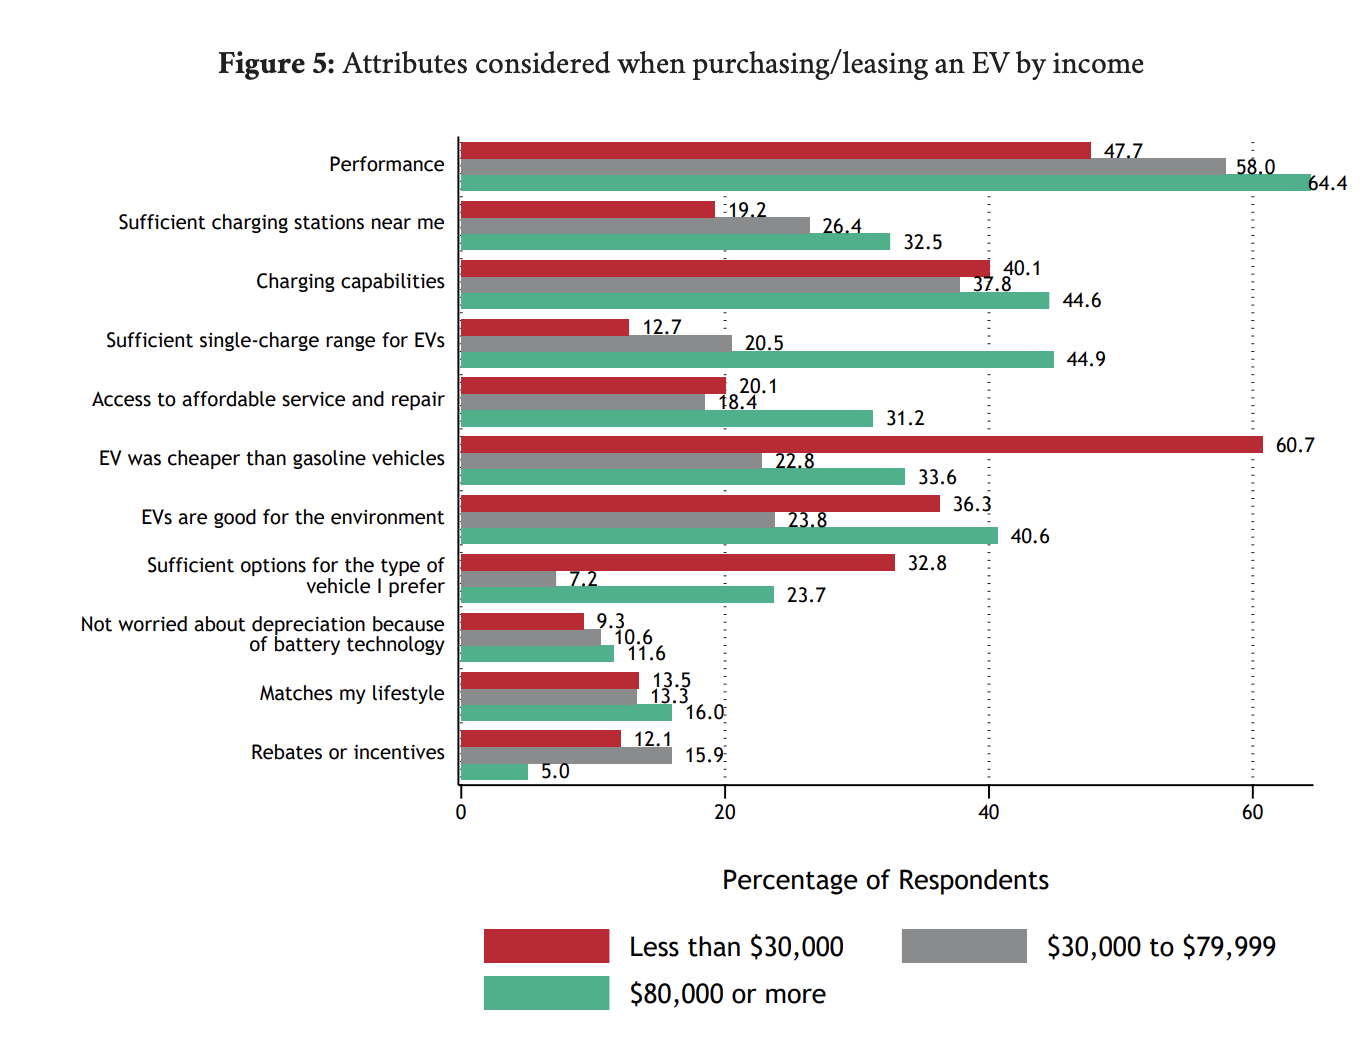 evs-by-income.png